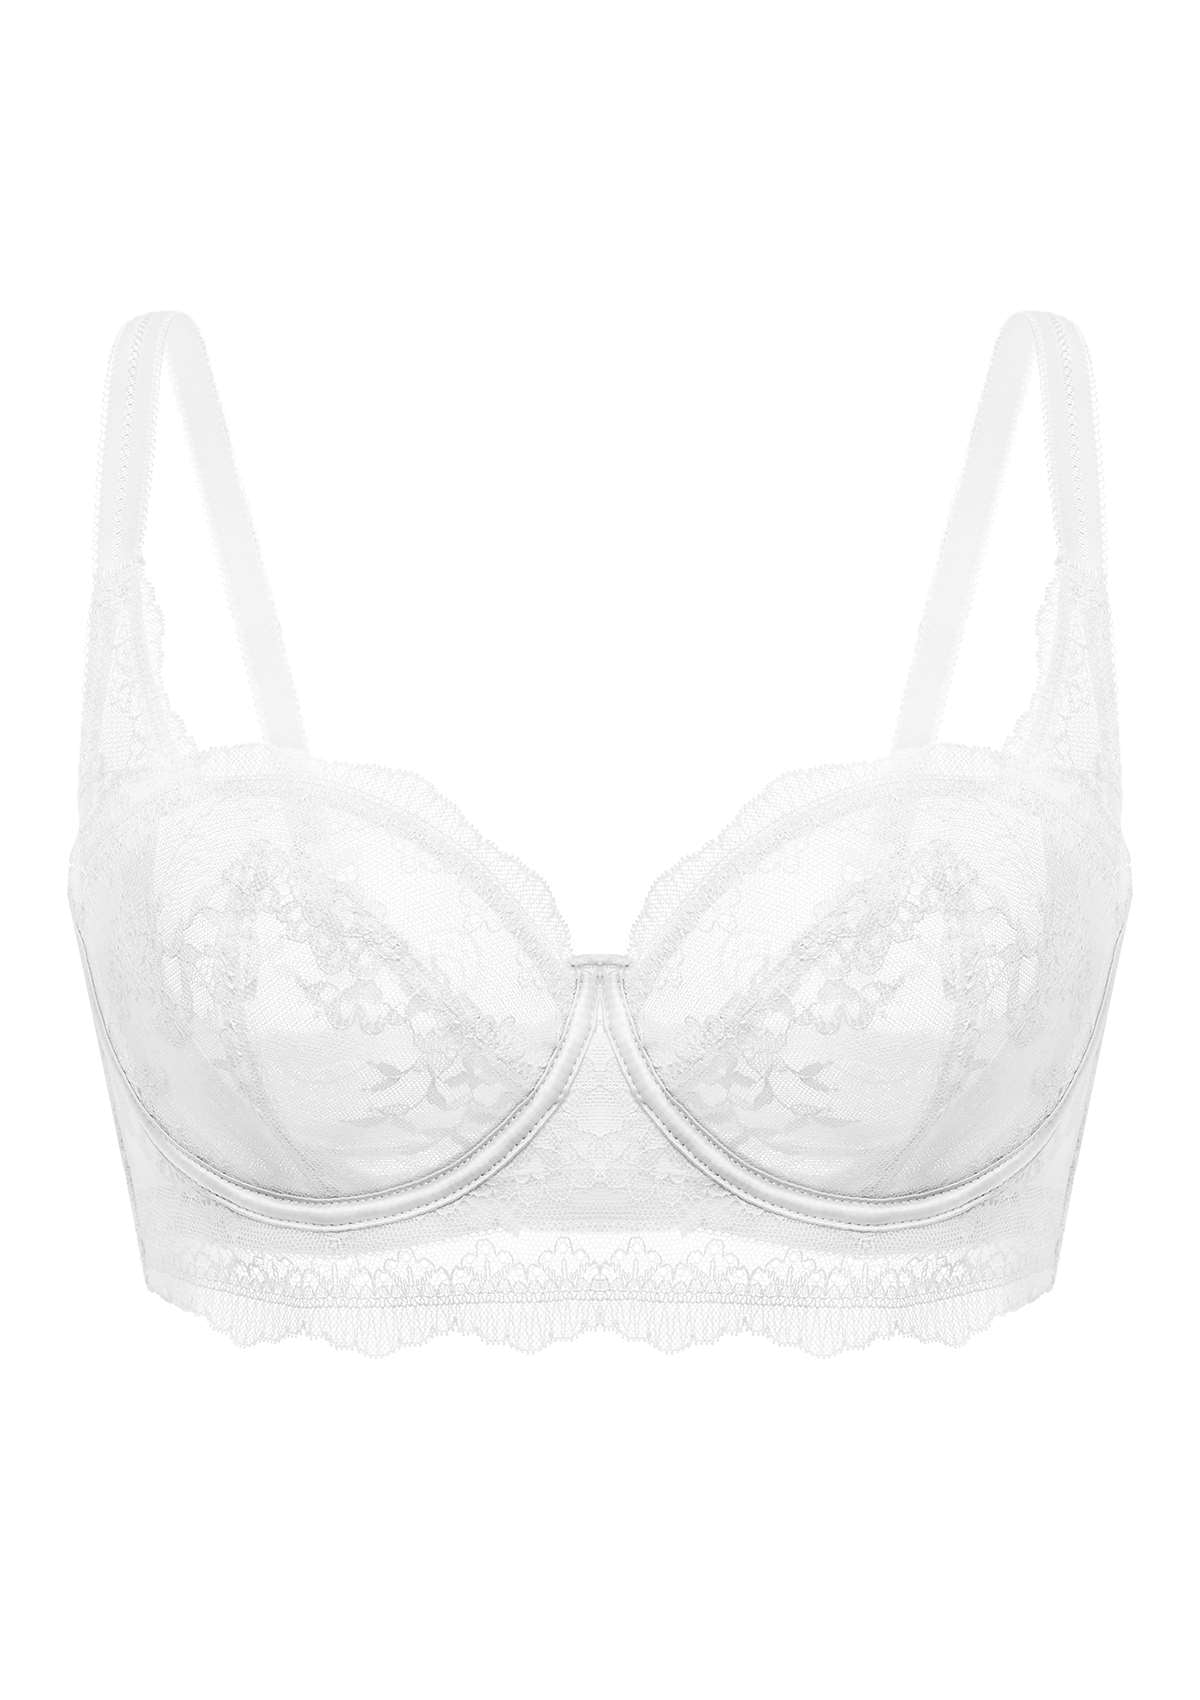 HSIA I Do Floral Lace Bridal Balconette Beautiful Bra For Special Day - White / 38 / C